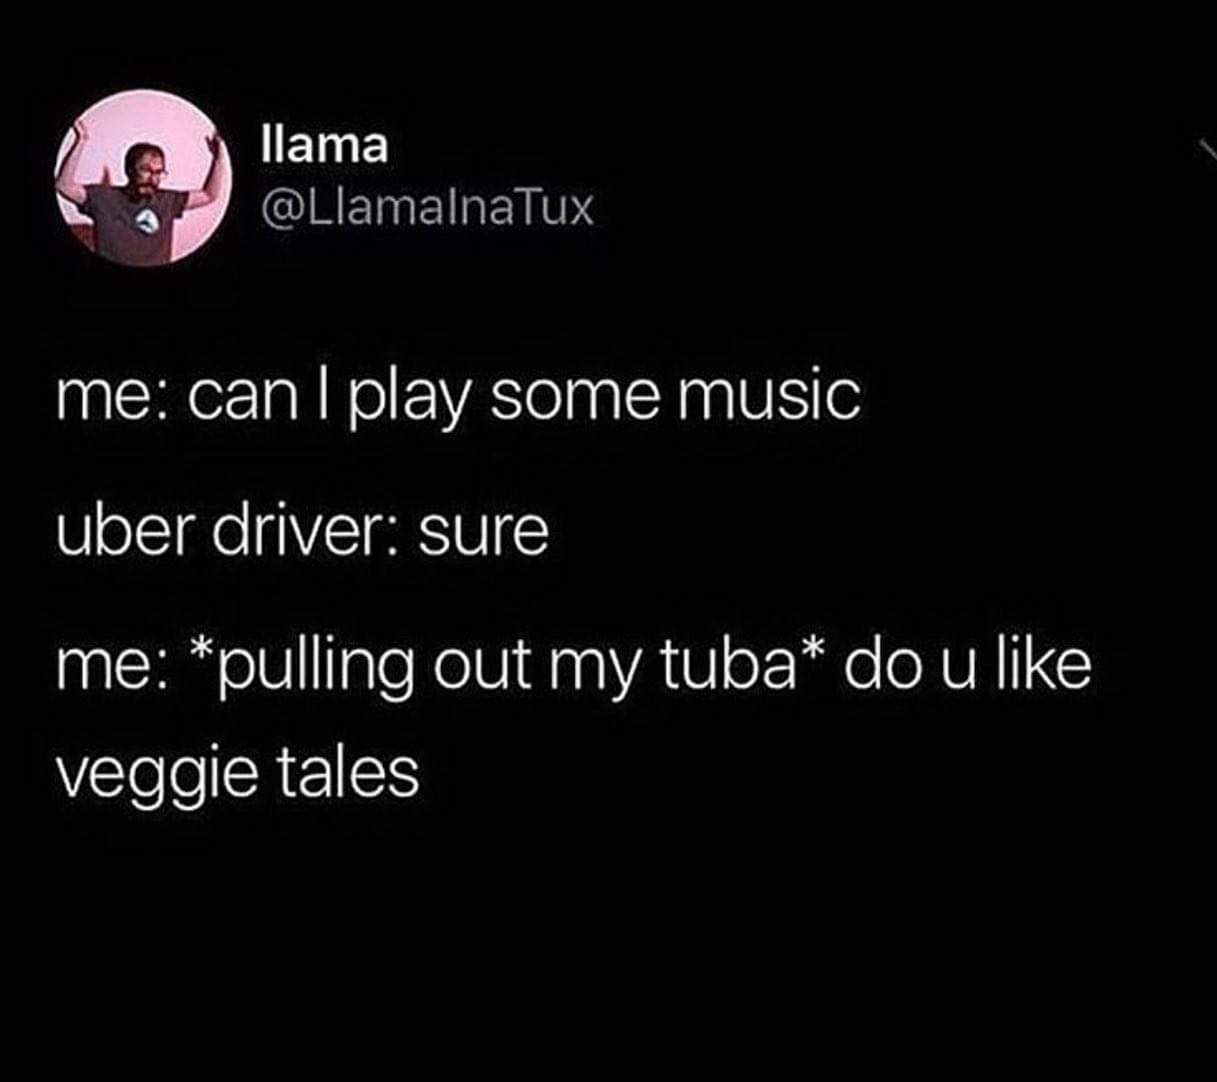 darkness - Mammalinatu llama me can I play some music uber driver sure me pulling out my tuba do u veggie tales